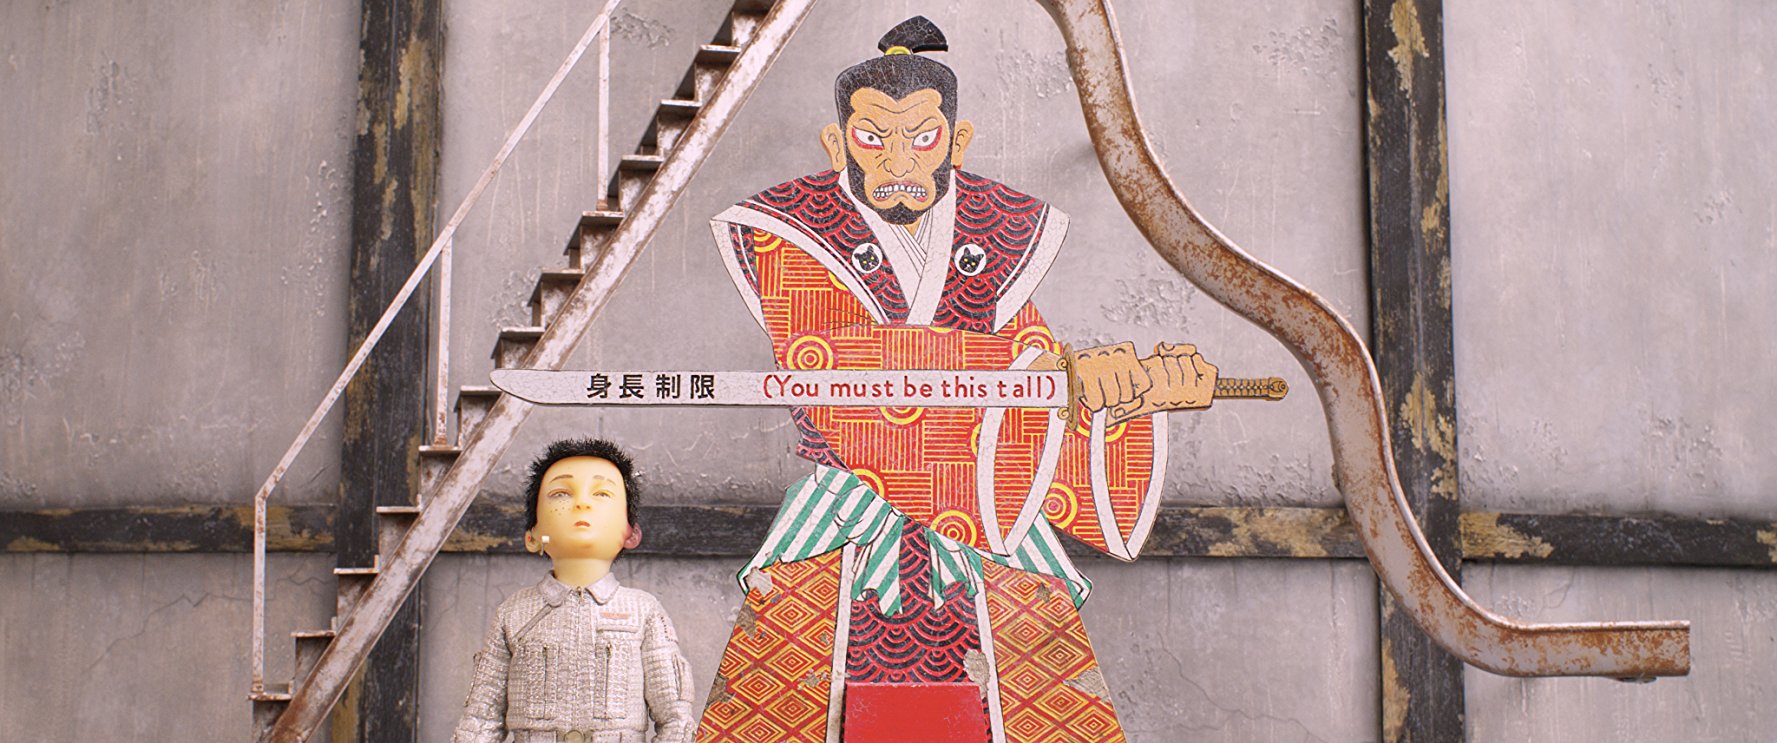 Atari (Koyu Rankin) stands under a Samurai sign that reads "You Must Be This Tall"